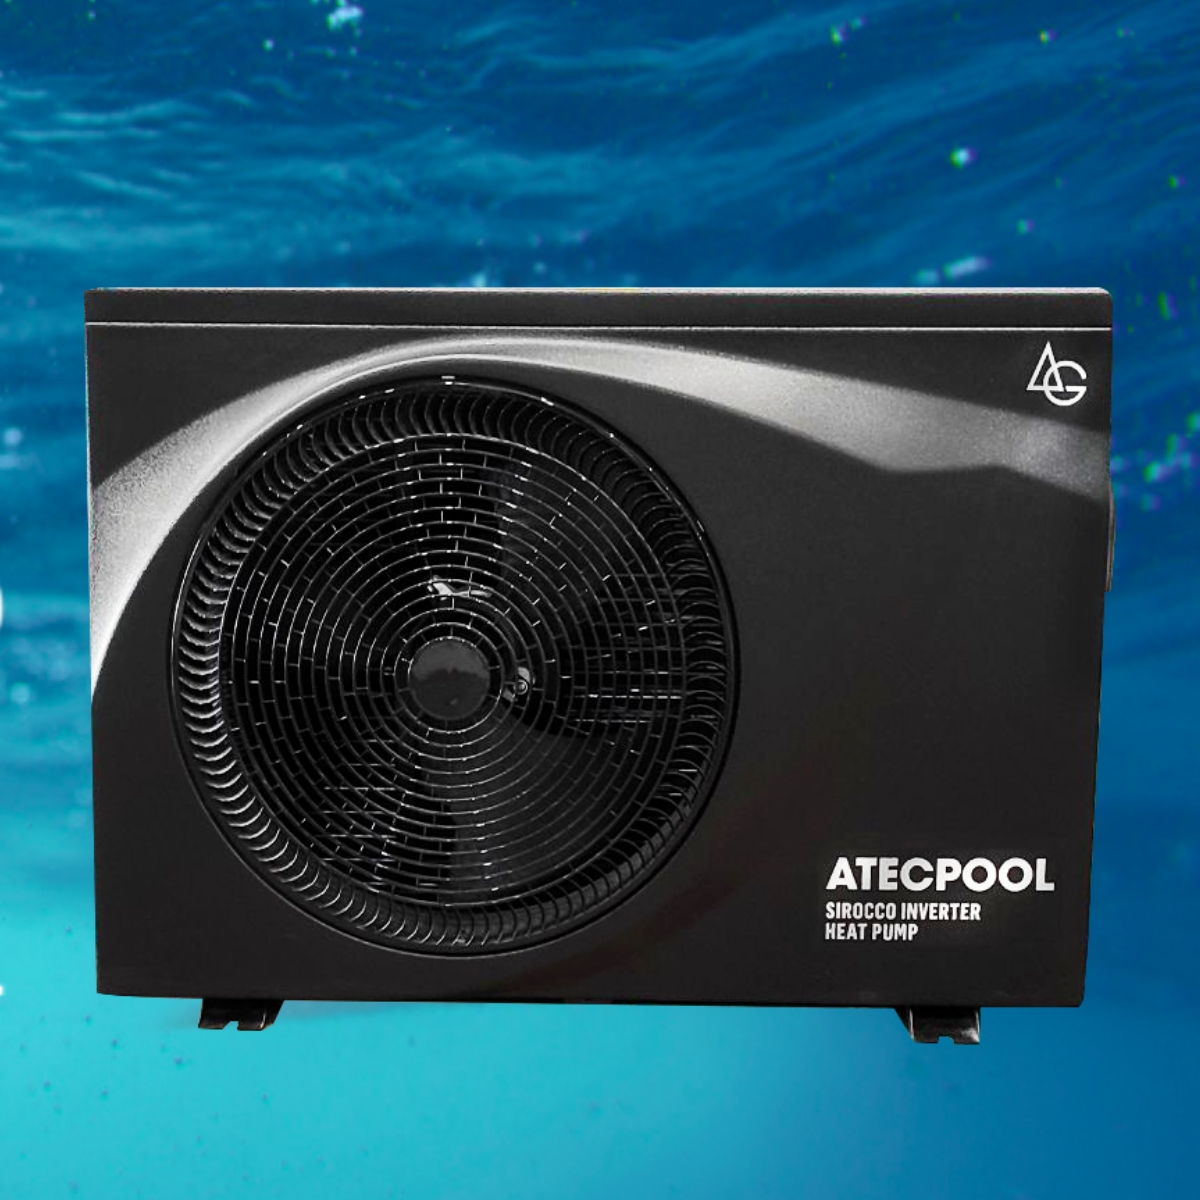 Discover the Ultimate Pool Comfort with Atecpool Sirocco Water Heat Cool Pump